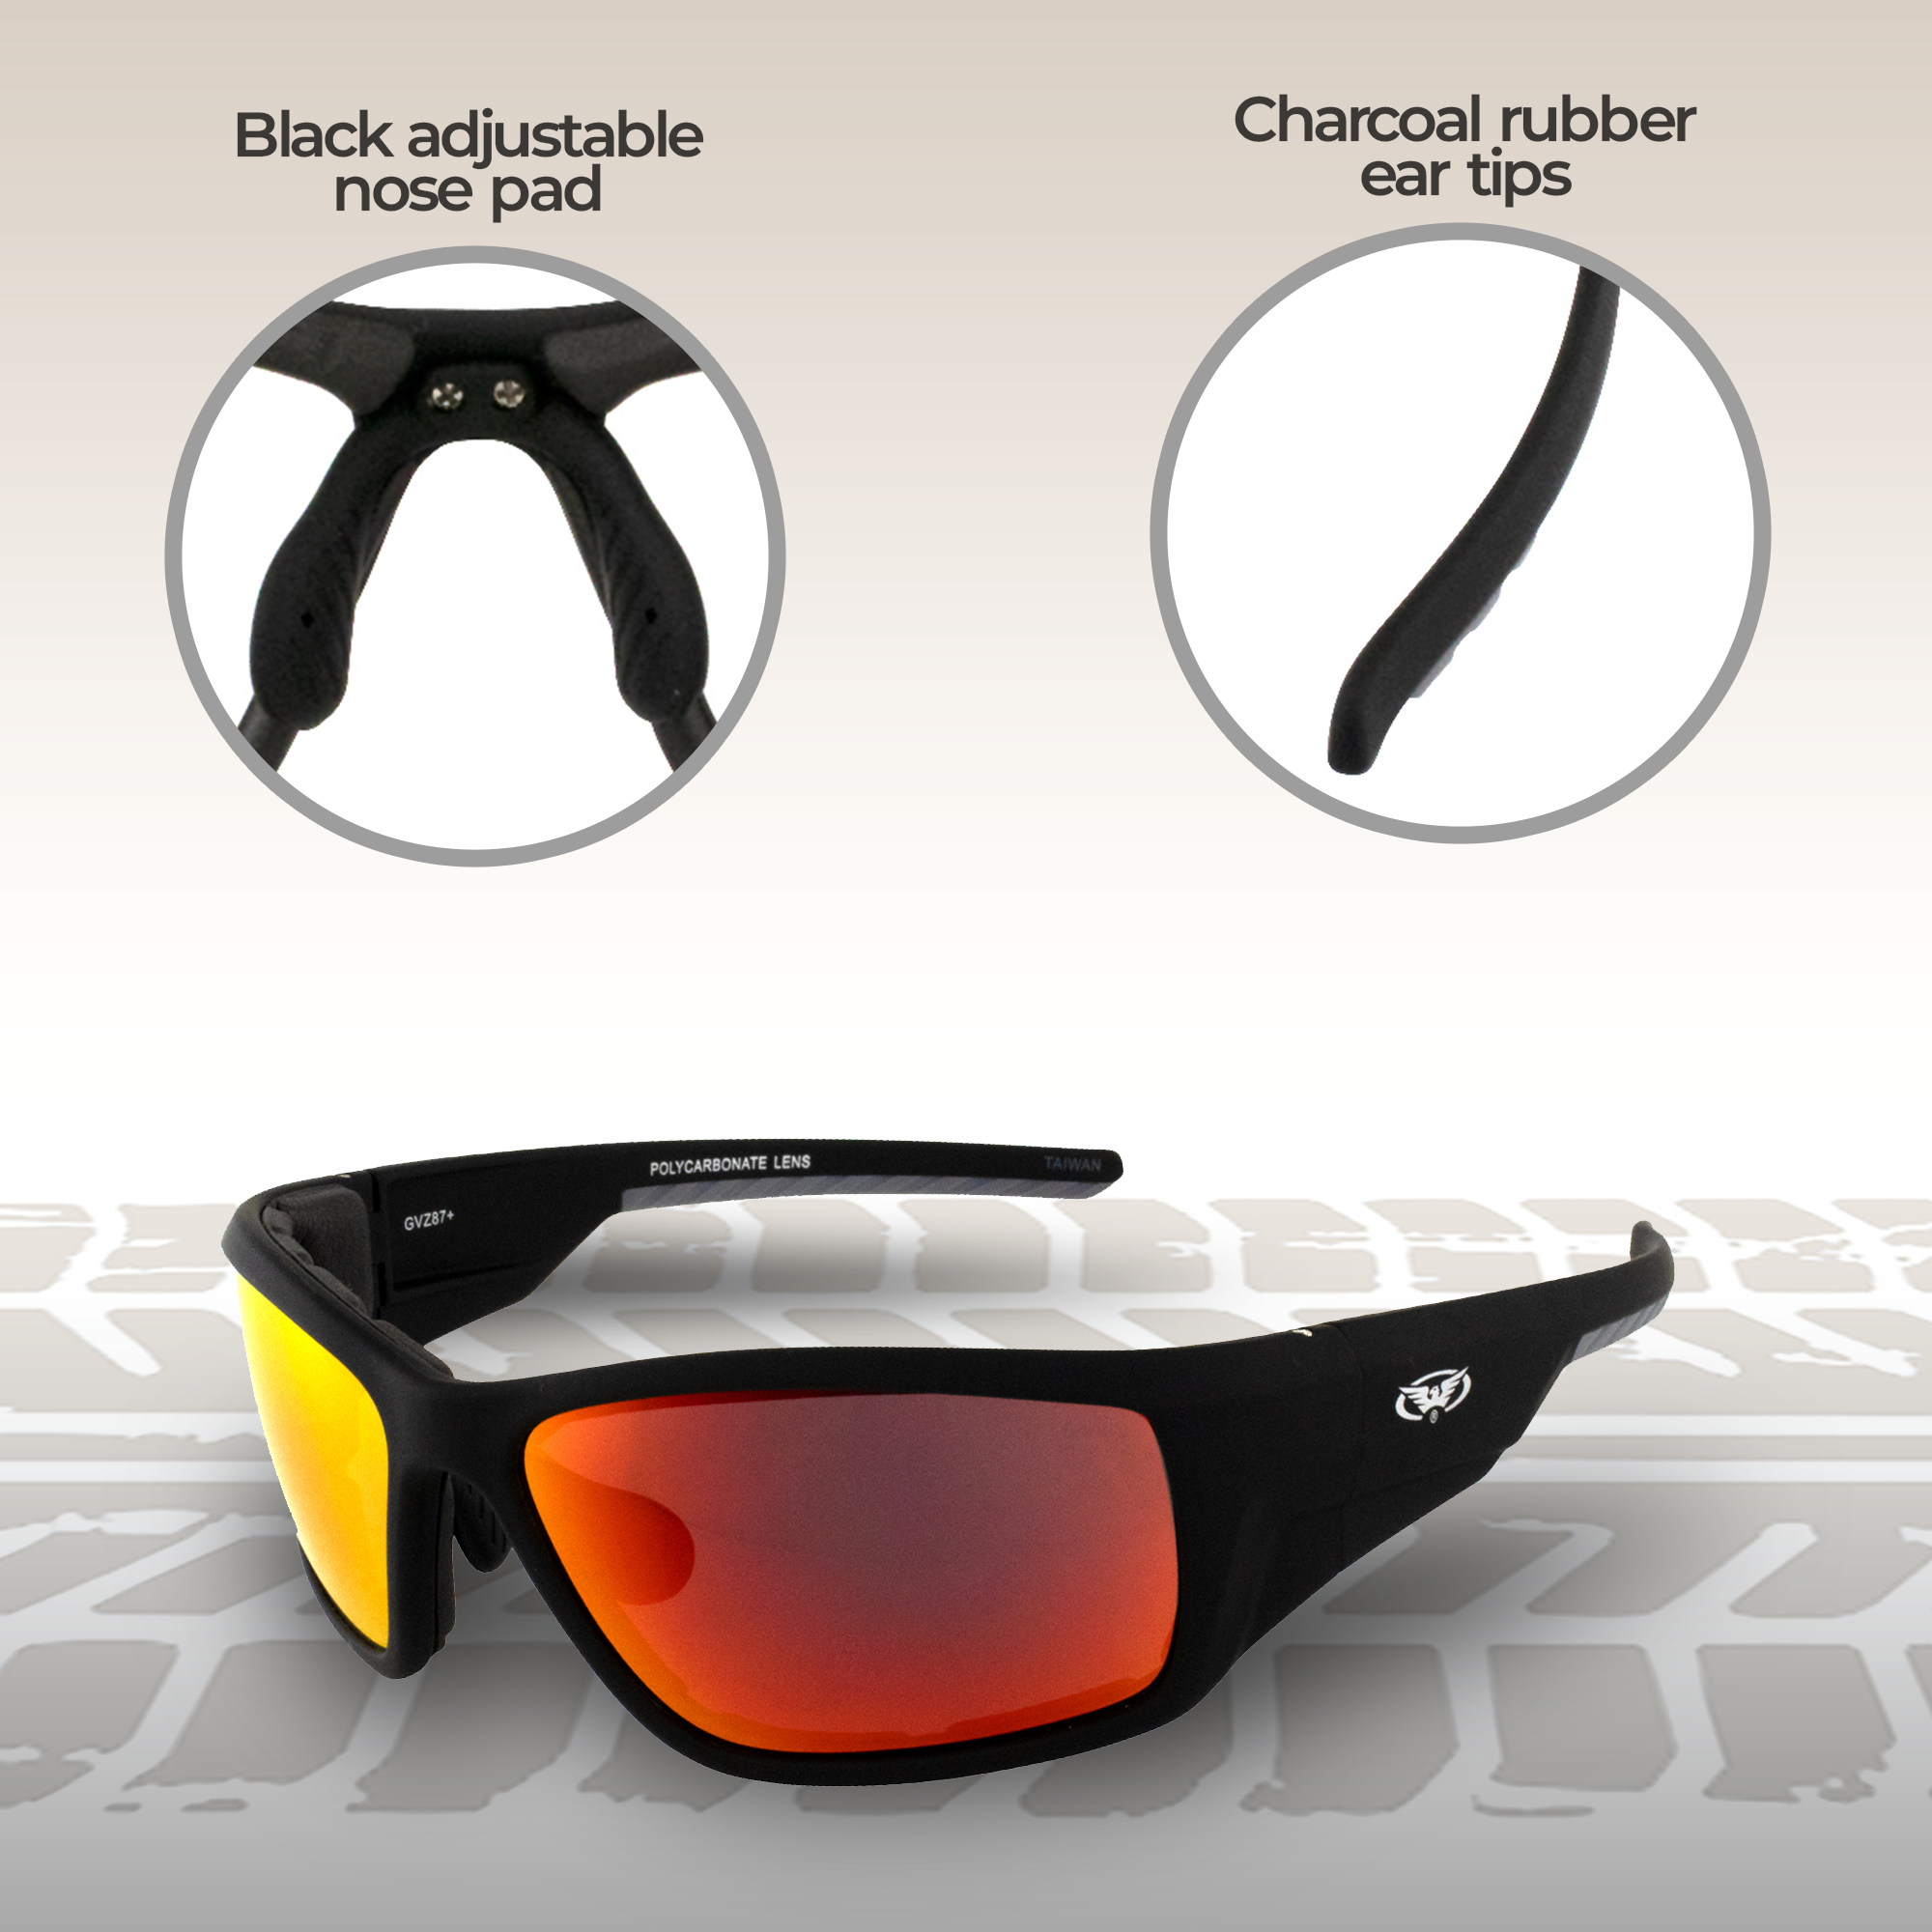 Global Vision Eyewear Kinetic Foam Padded Motorcycle Safety Sunglasses Soft Touch Black Frames with G-Tech Red Mirror Lenses - image 3 of 7